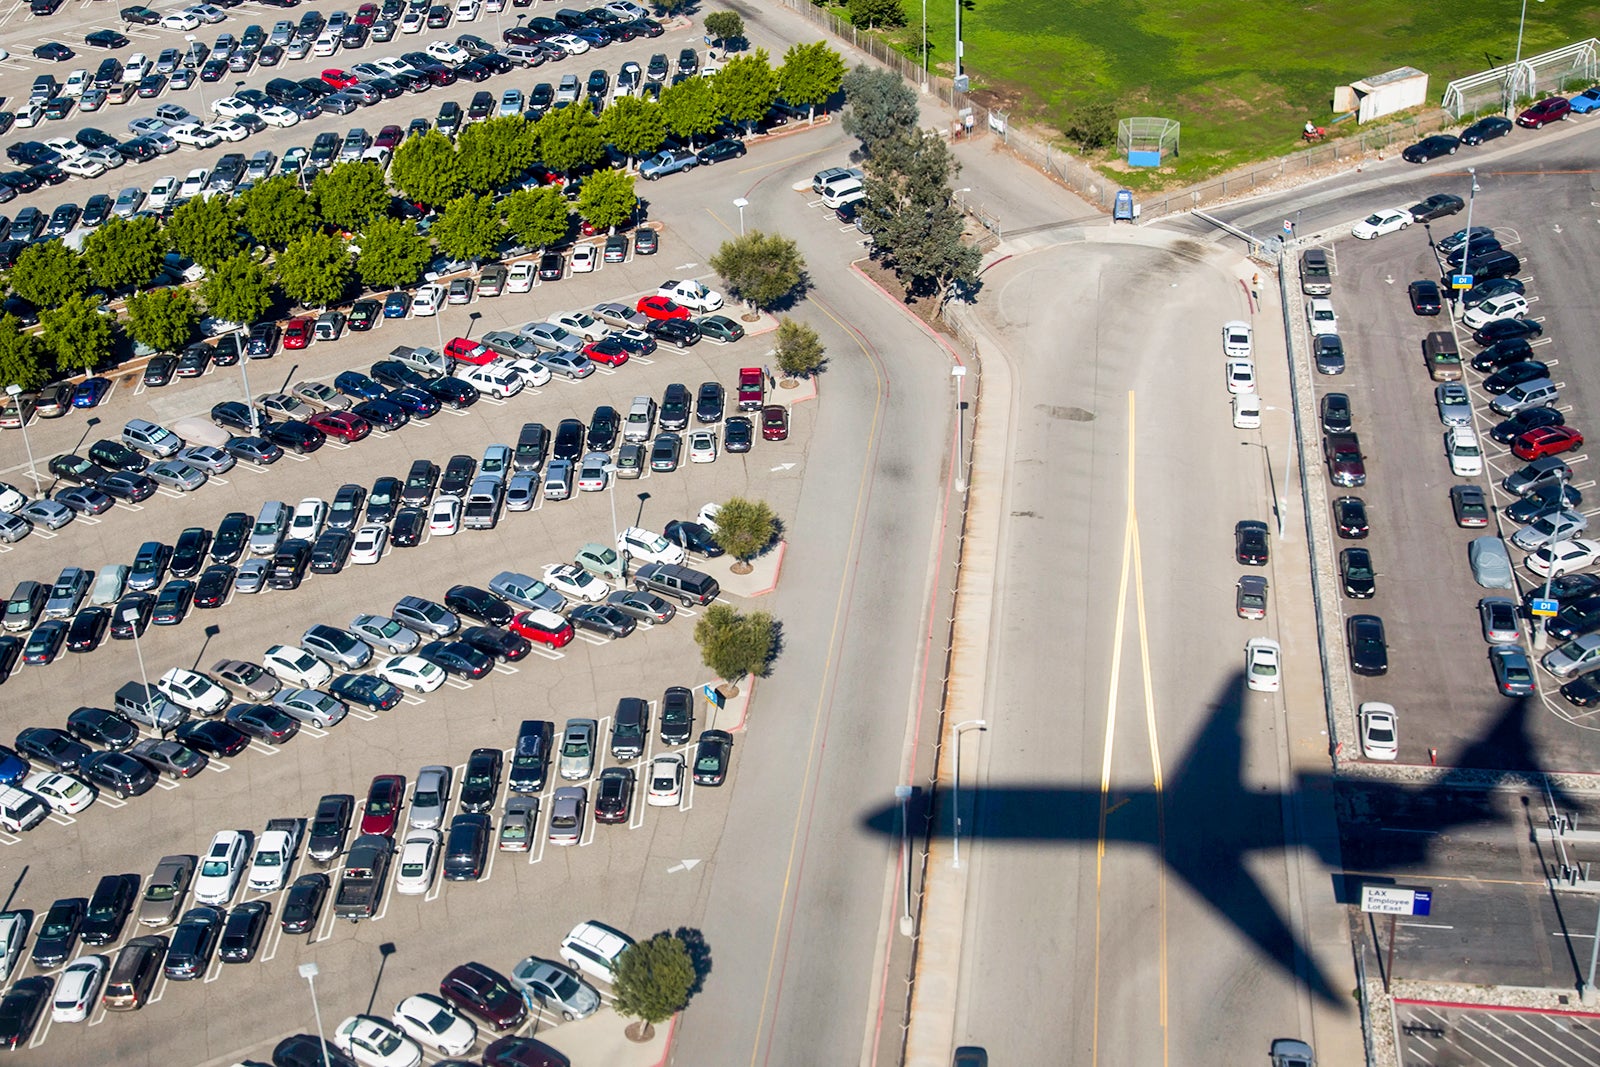 LAX's parking lots fill up quickly_Steve Whiston:Fallen Log Photography:Getty Images